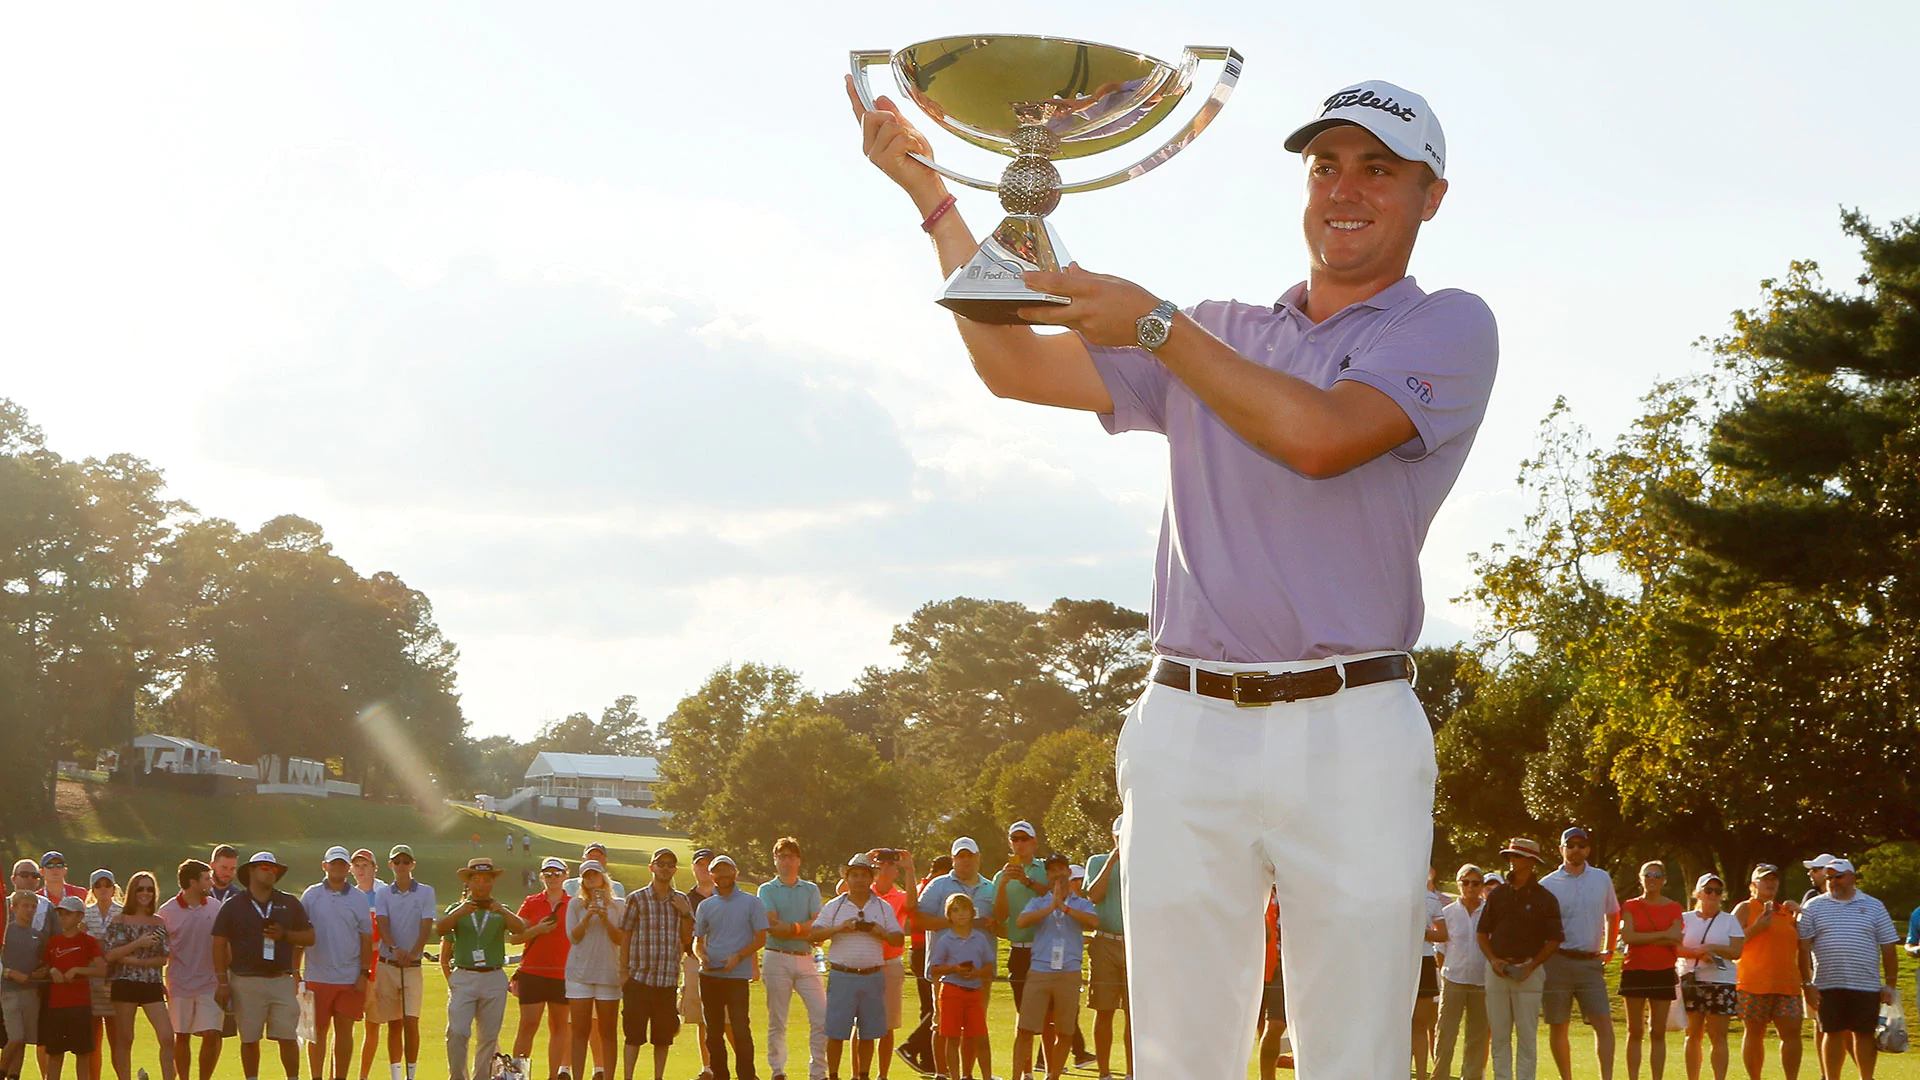 Thomas doesn't pull 'Phil move' with FedEx trophy